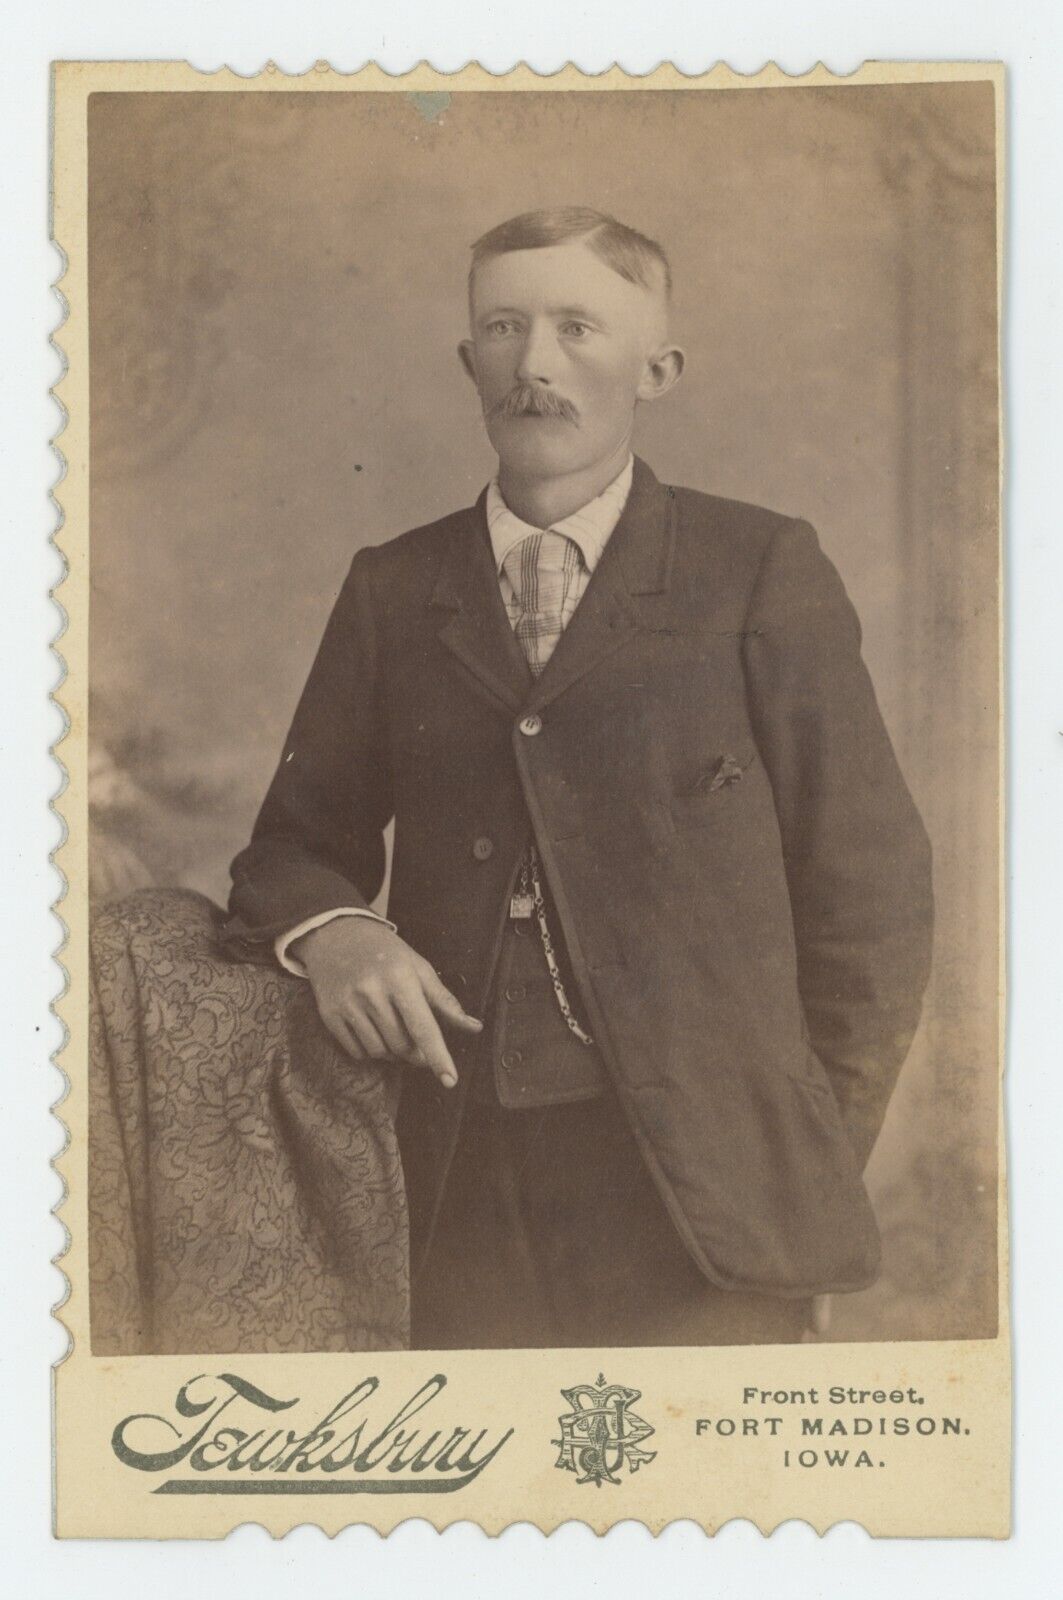 Antique c1890s Cabinet Card Handsome Man With Mustache in Suit Fort Madison, IA